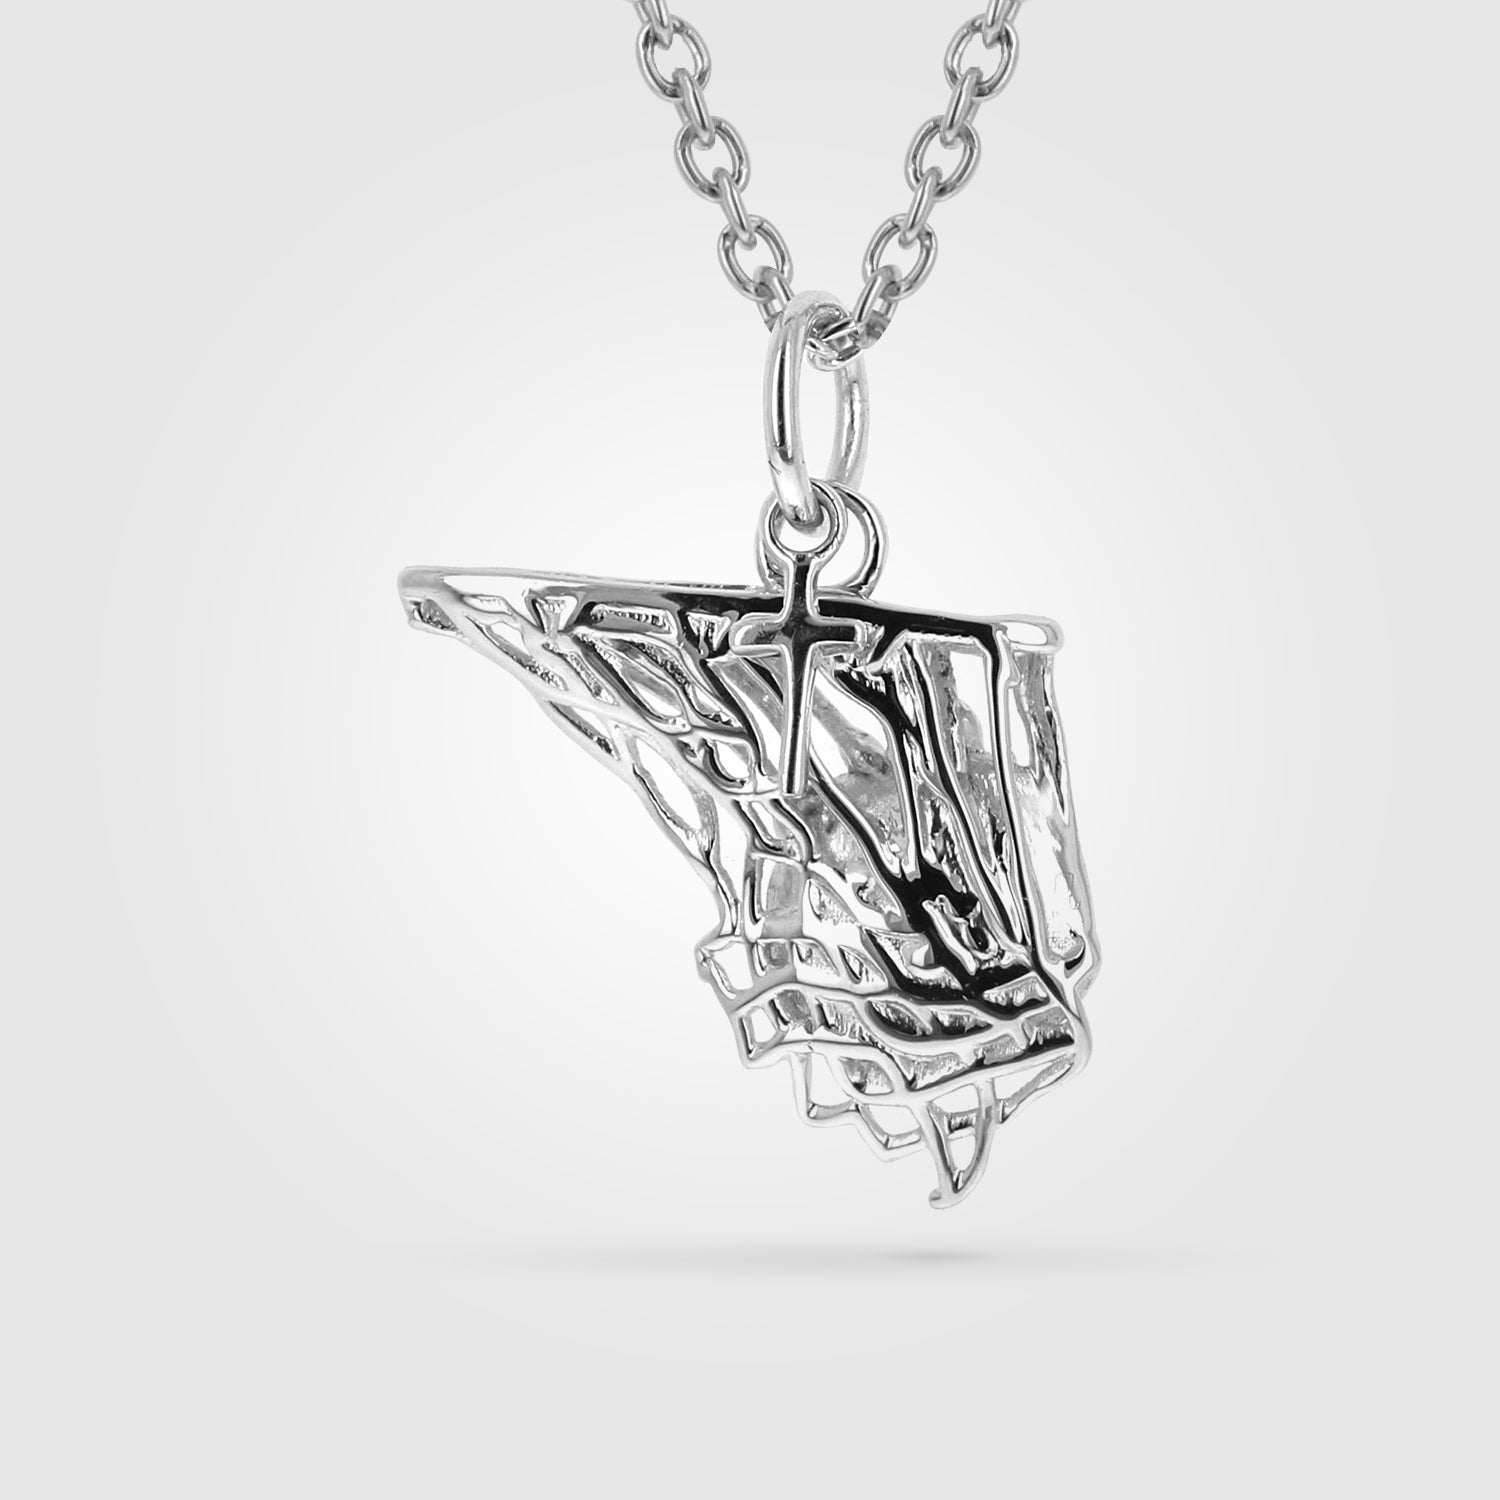 1pc Silver-color Alloy Basketball Hoop & Net Design Pendant With Rhinestone  Decor Sports Trendy Necklace